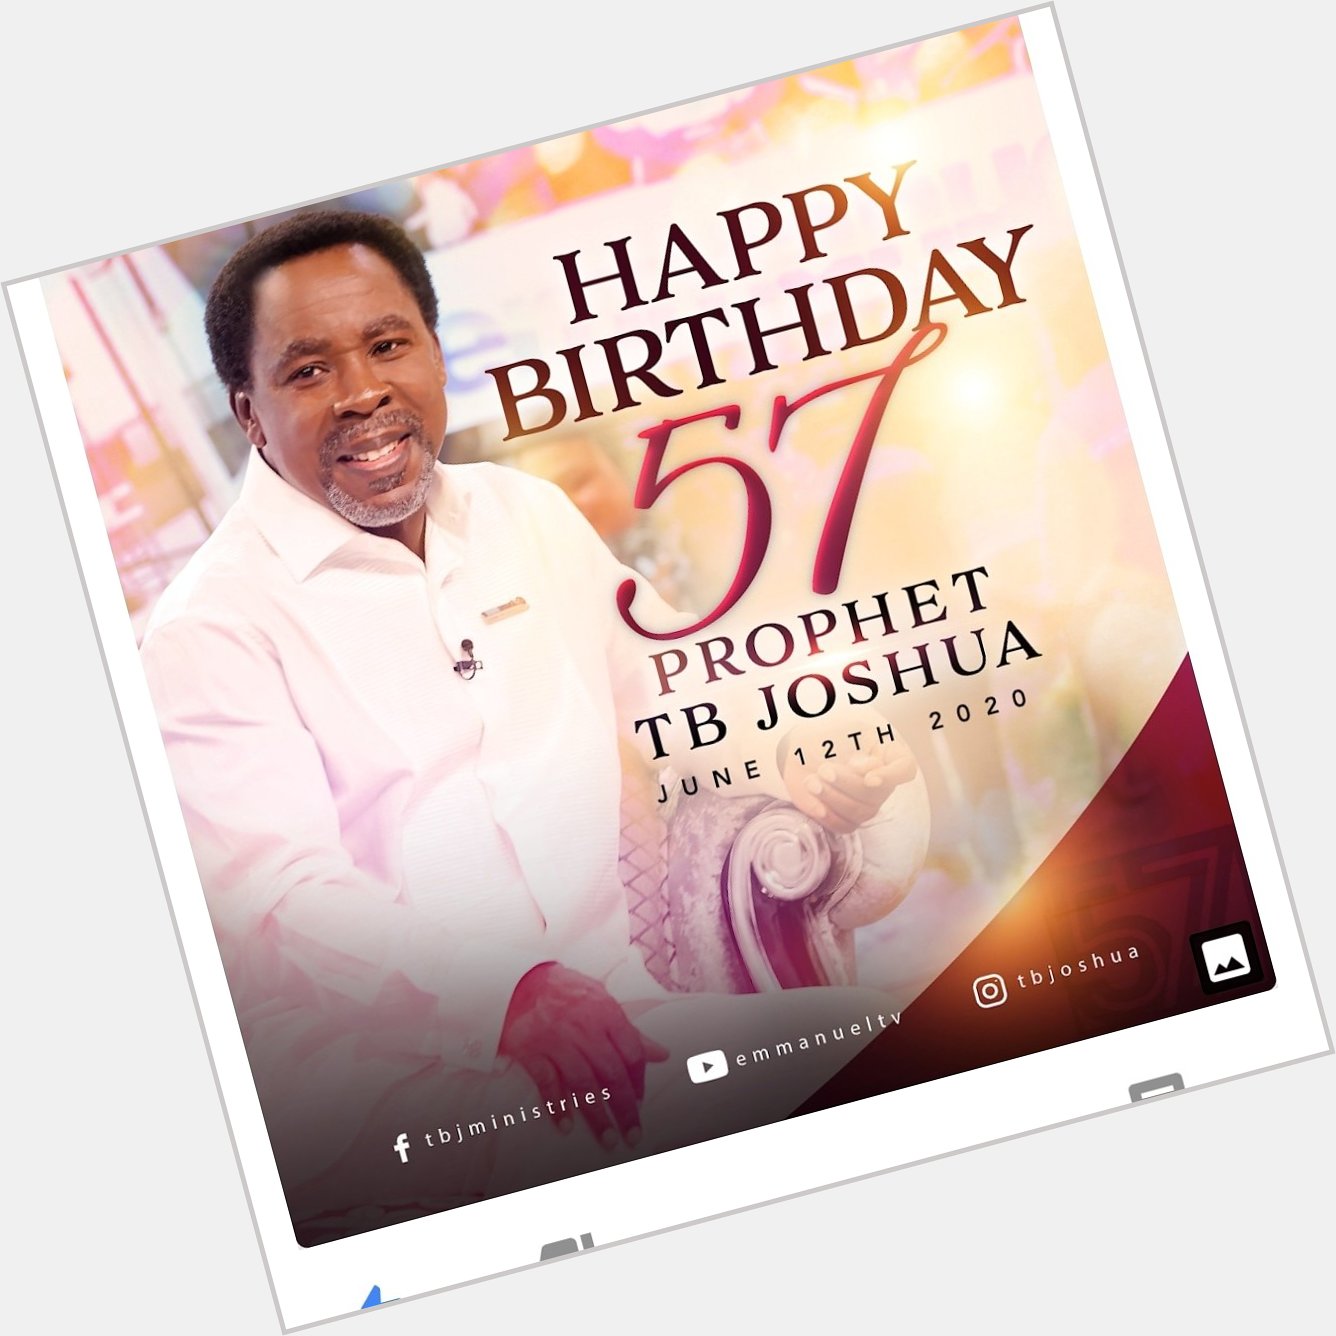 Happy 57th birthday Prophet T.B Joshua. May the Lord continue to fill you with His Grace in abondance. 